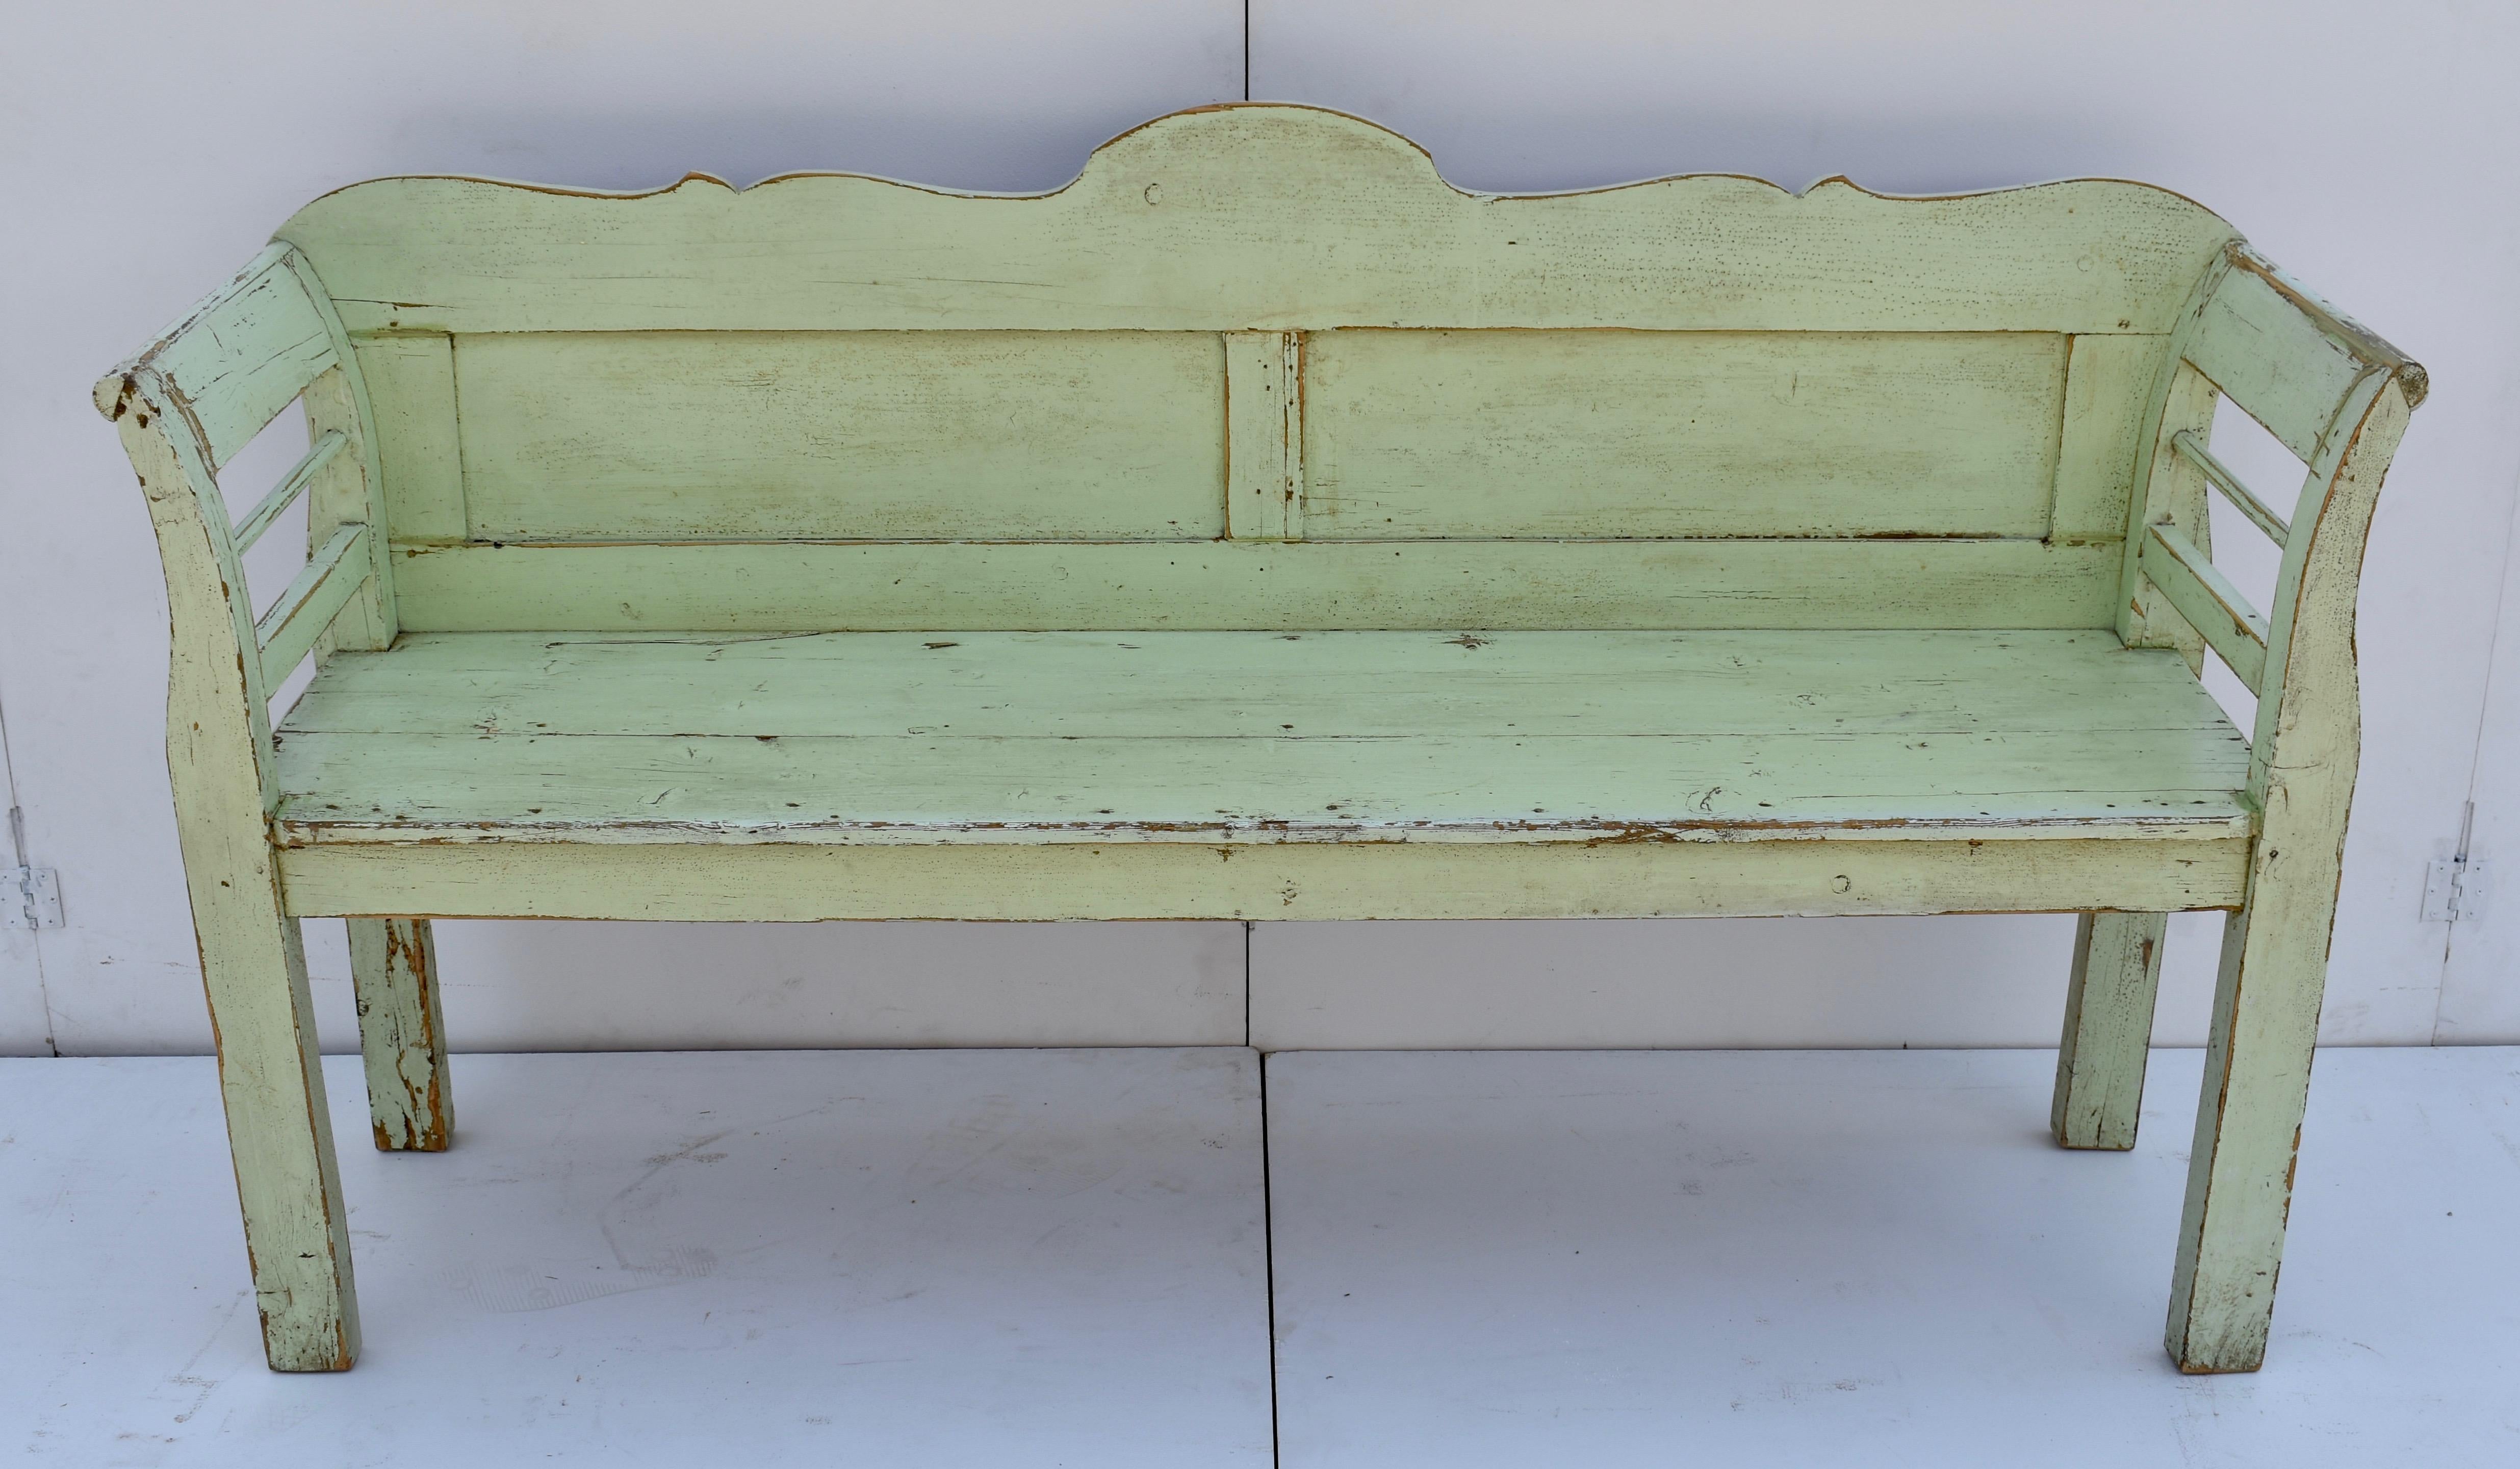 This lovely painted bench has a nicely scalloped top rail above two enclosed flat panels. The integral scrolled arms and rectangular legs support a seat which is conveniently shallower than most yet still comfortable. A classic Central European form